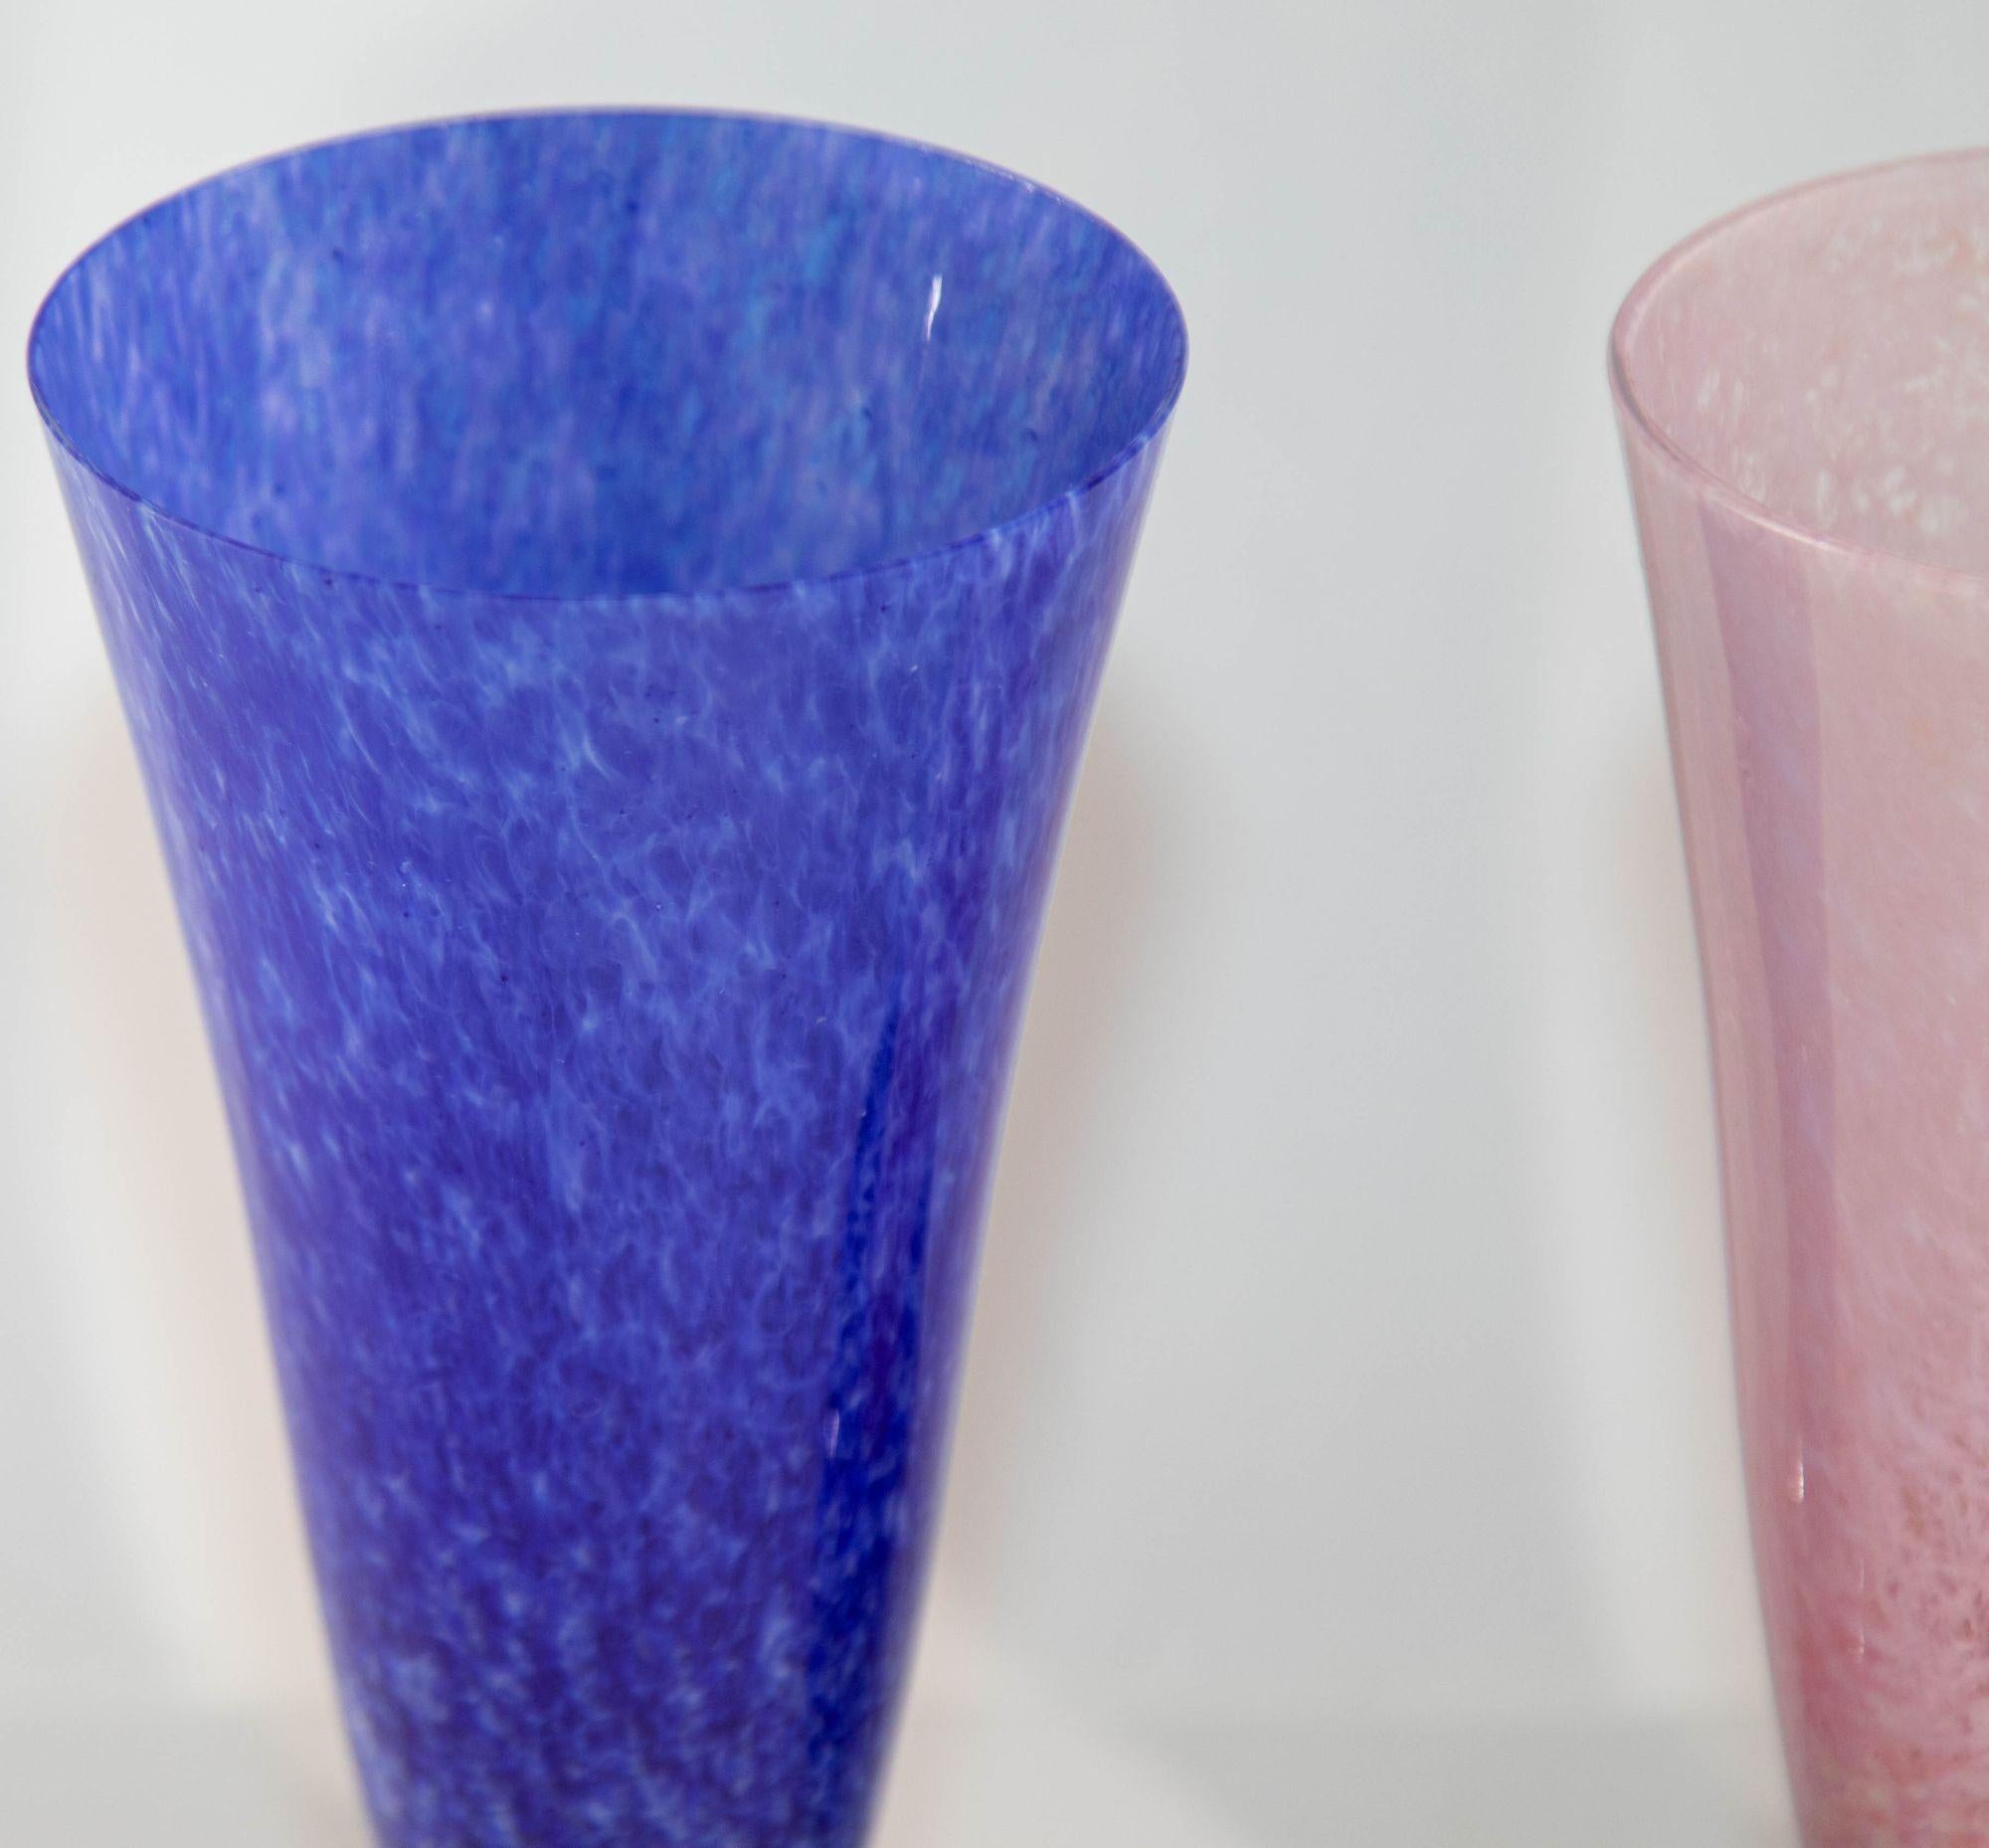 Guy Corrie Union Glass Donut Base Art Glass Vases Cobalt Blue Pink 1980s Set In Good Condition For Sale In North Hollywood, CA